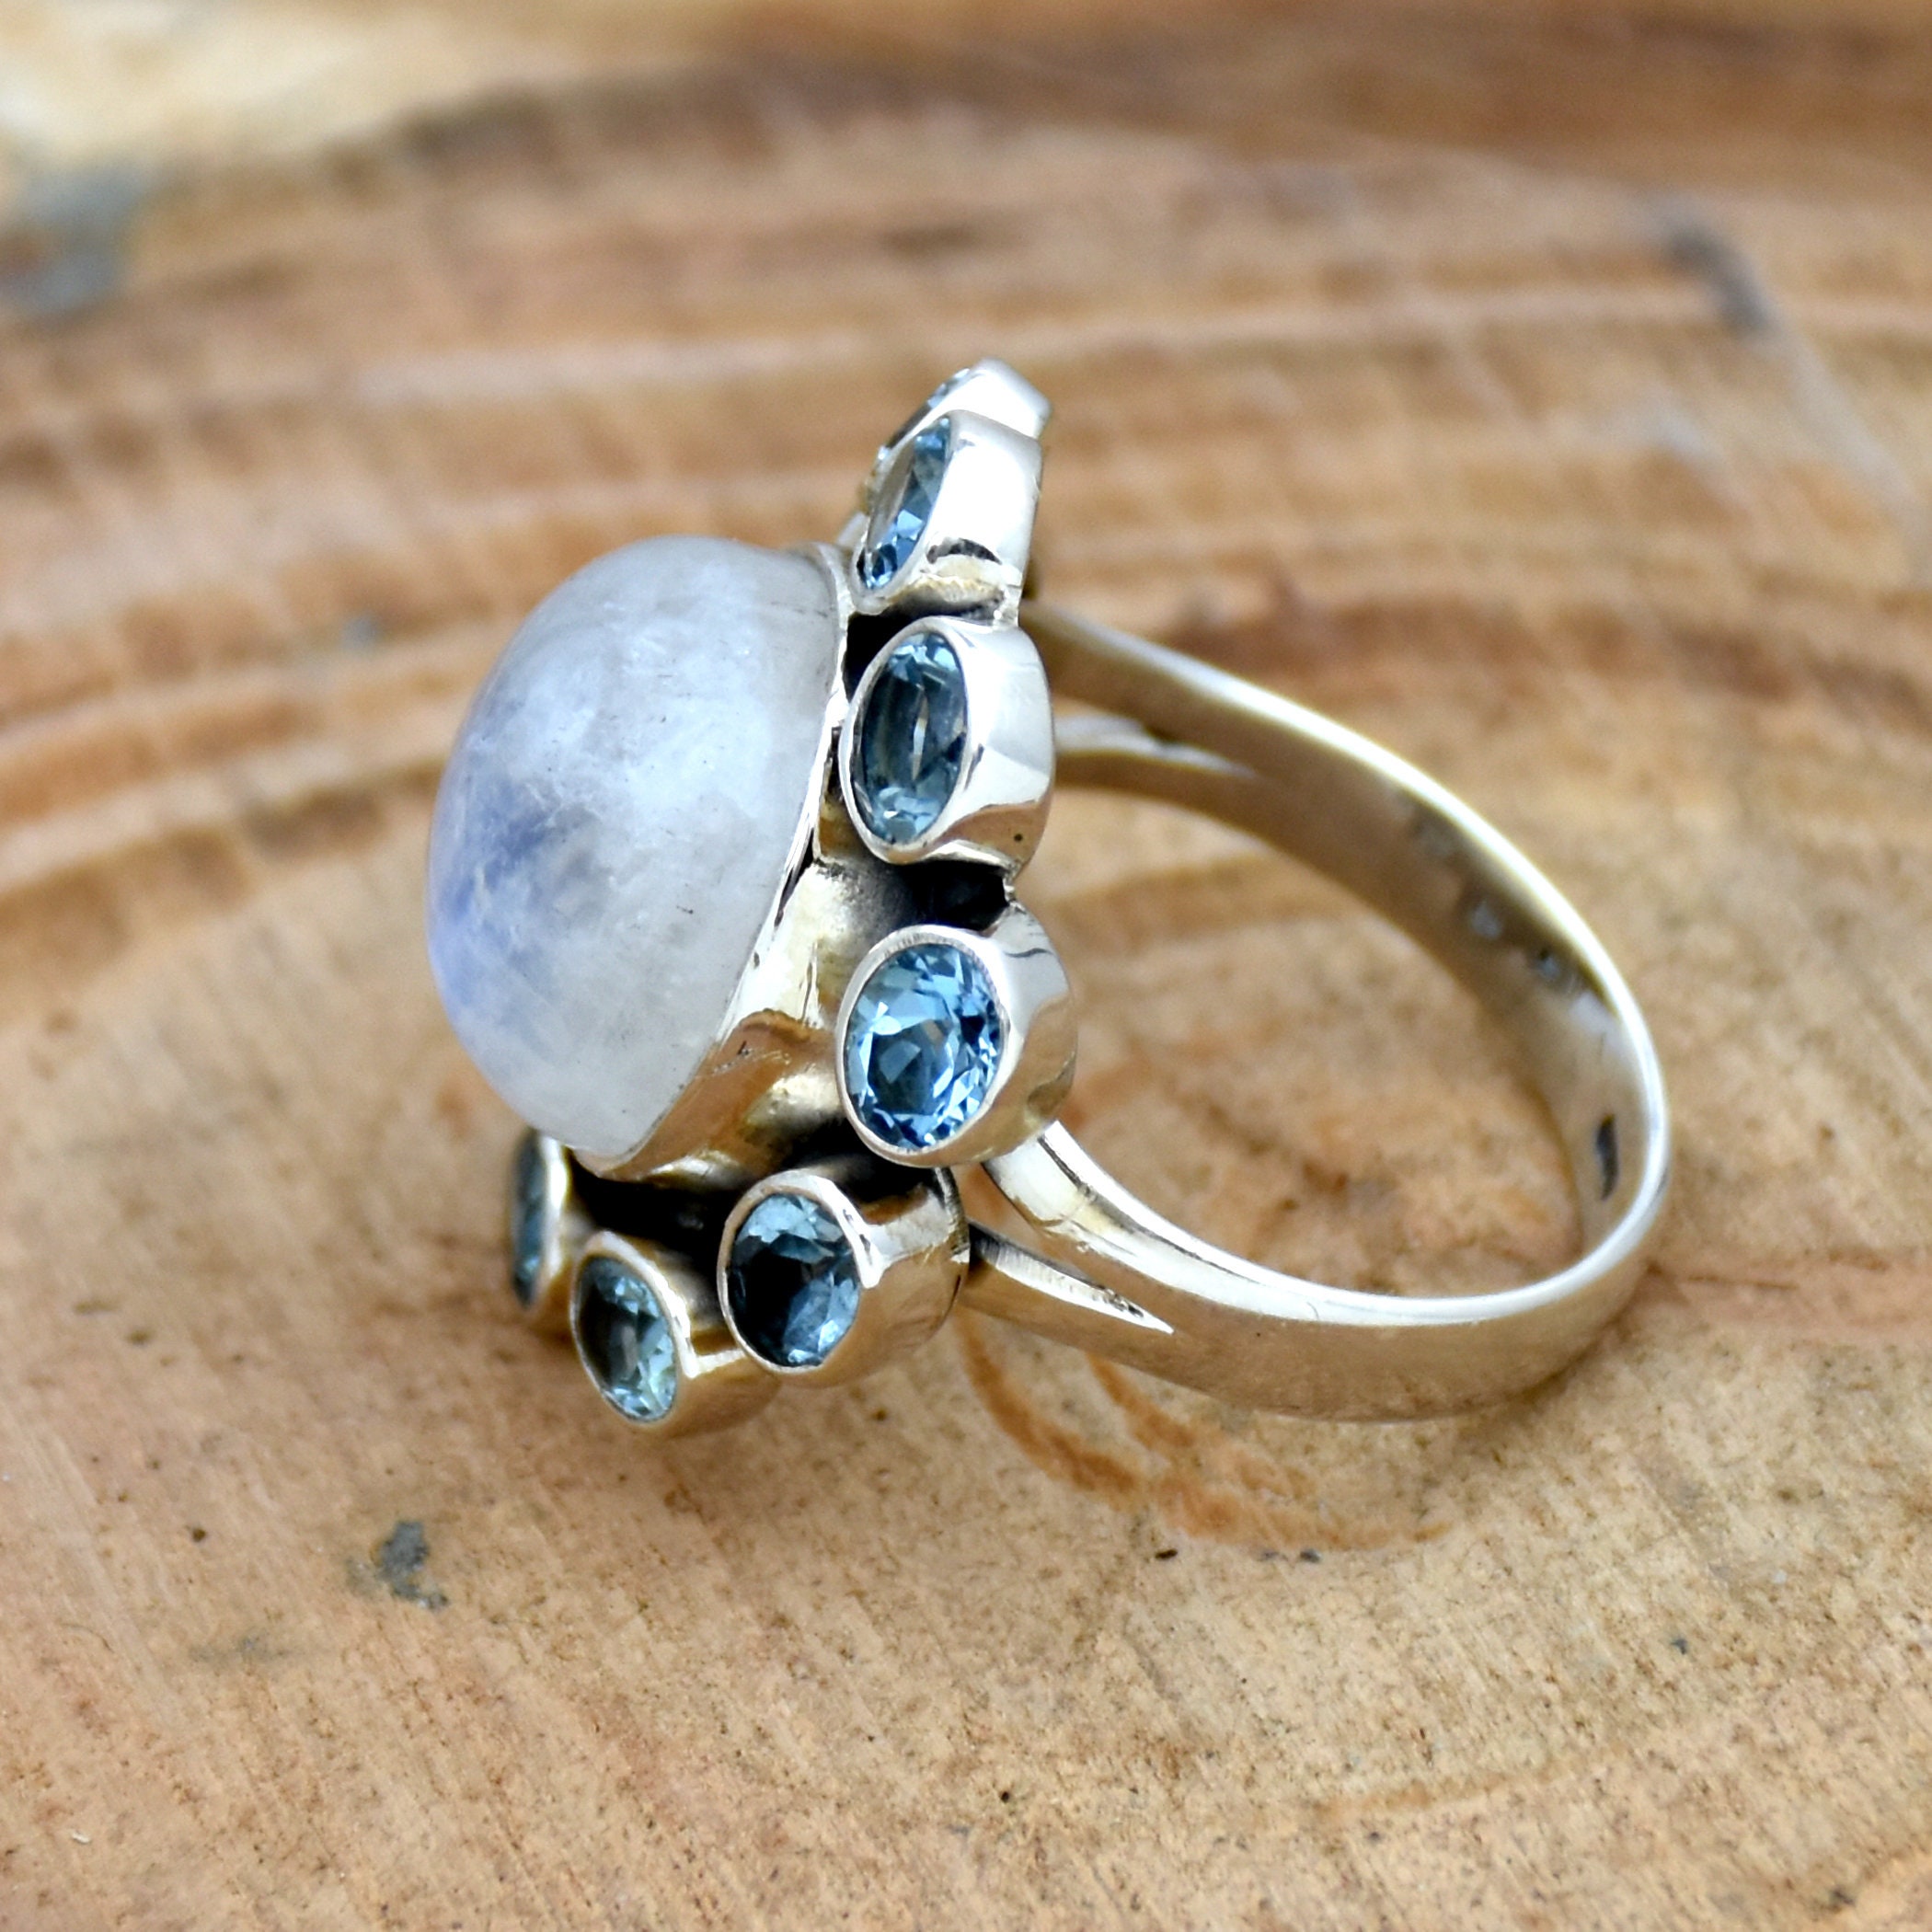 Moonstone and Blue Topaz Ring 925 Sterling Silver Ring - Etsy UK